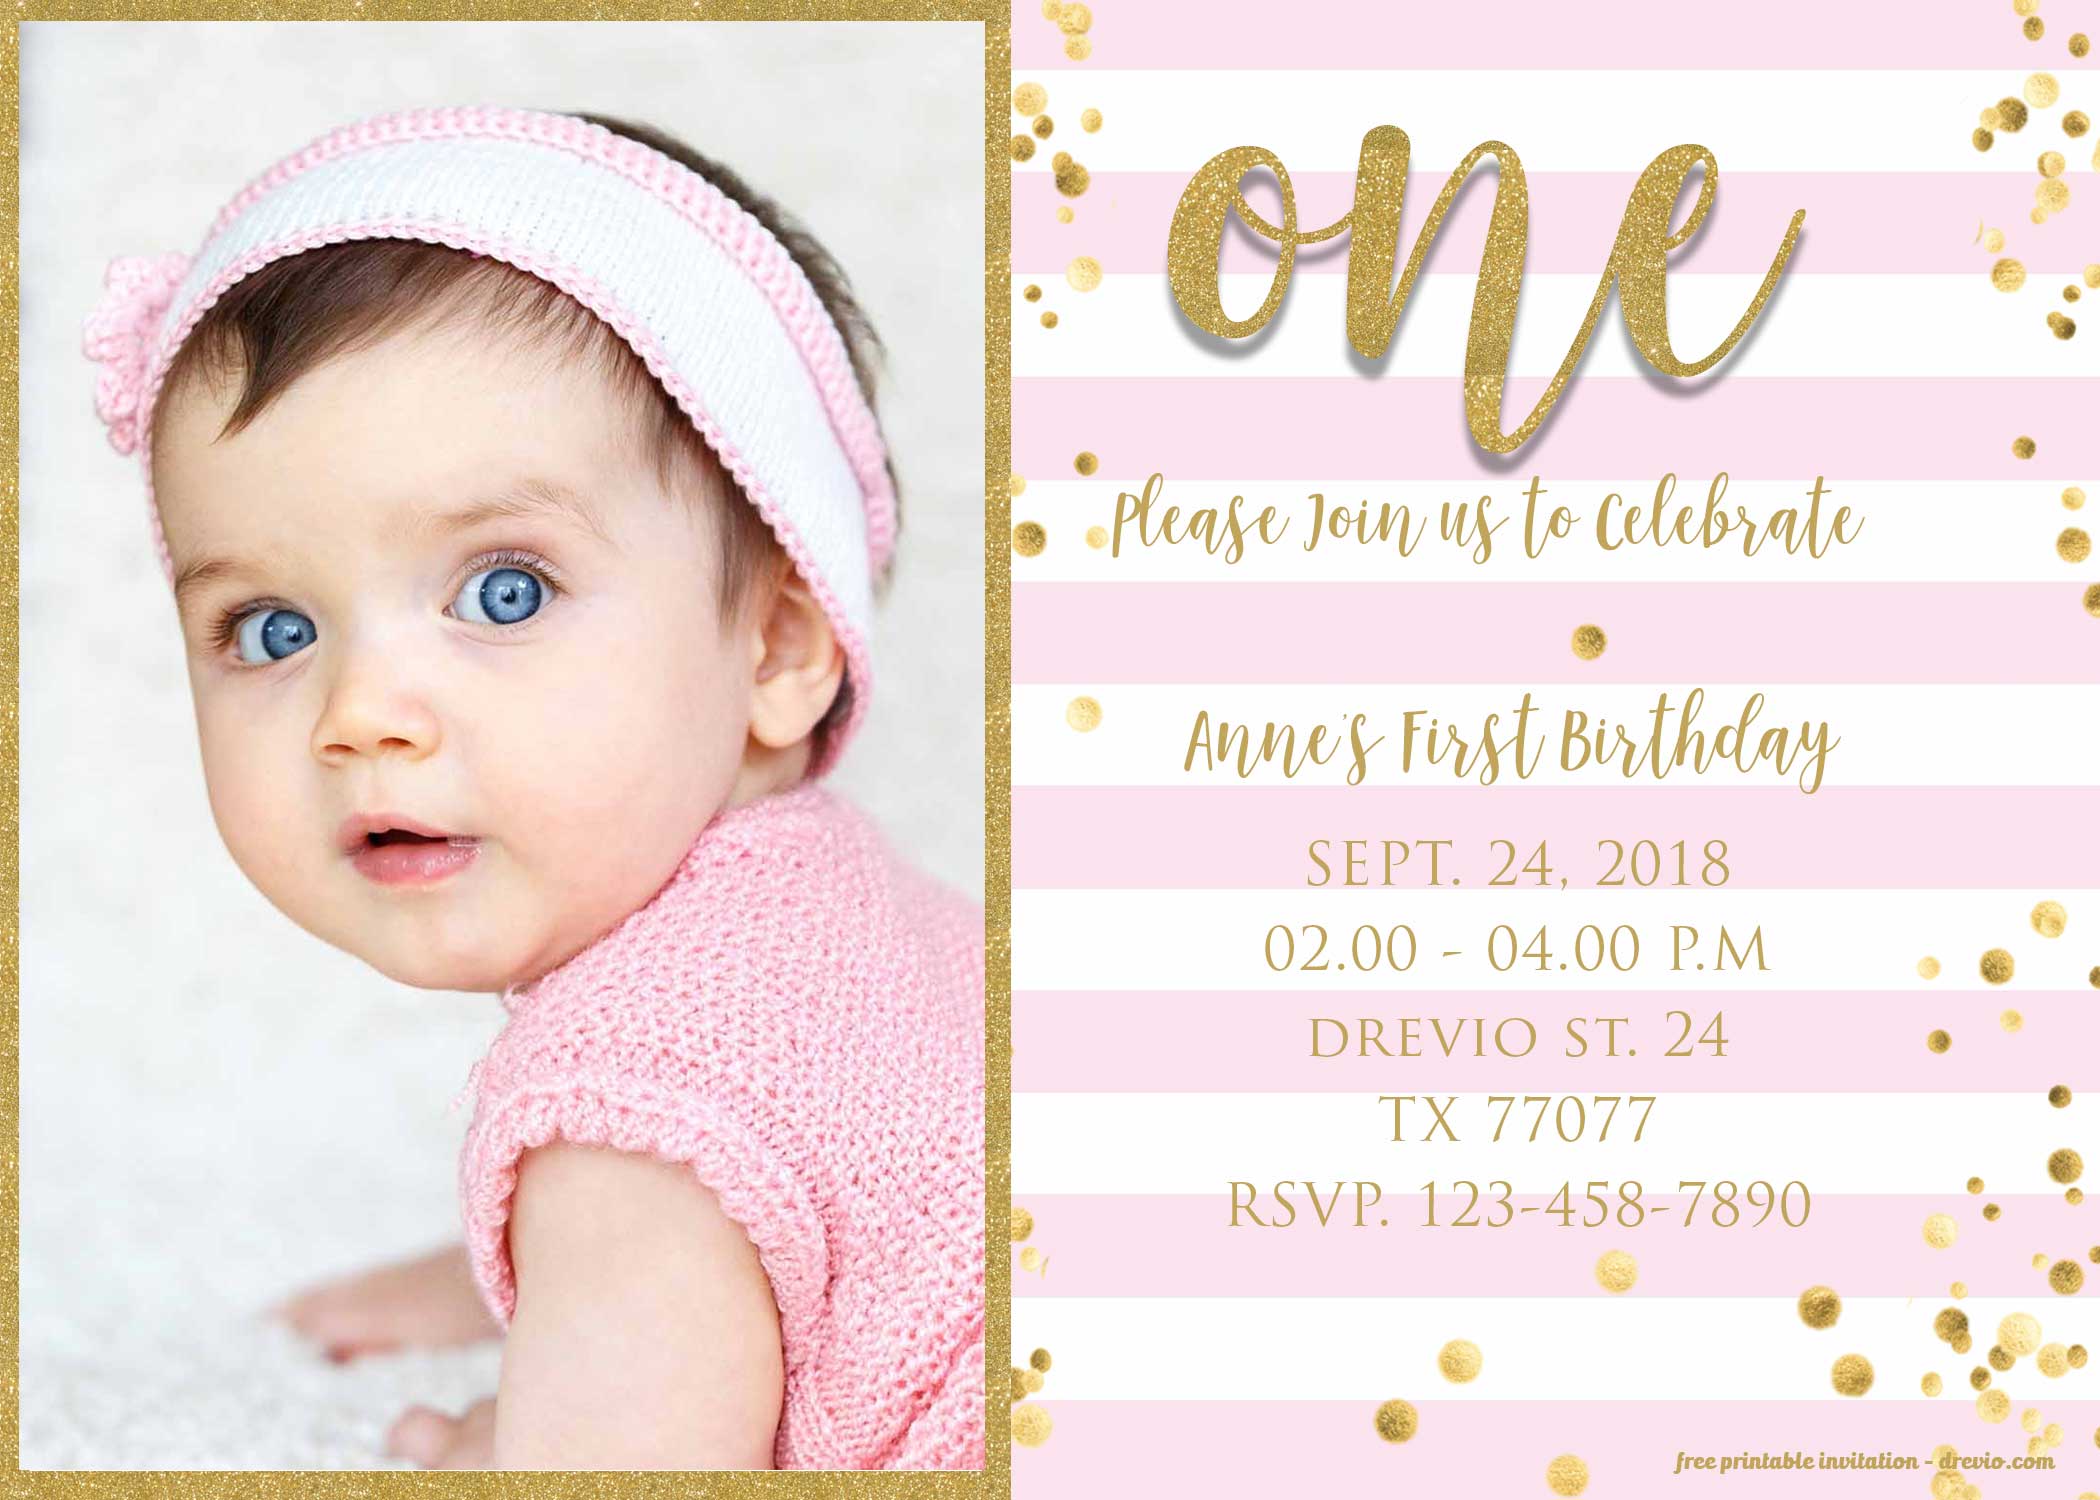 Free 1st Birthday Invitation Pink And Gold Glitter Template Download Hundreds Free Printable Birthday Invitation Templates